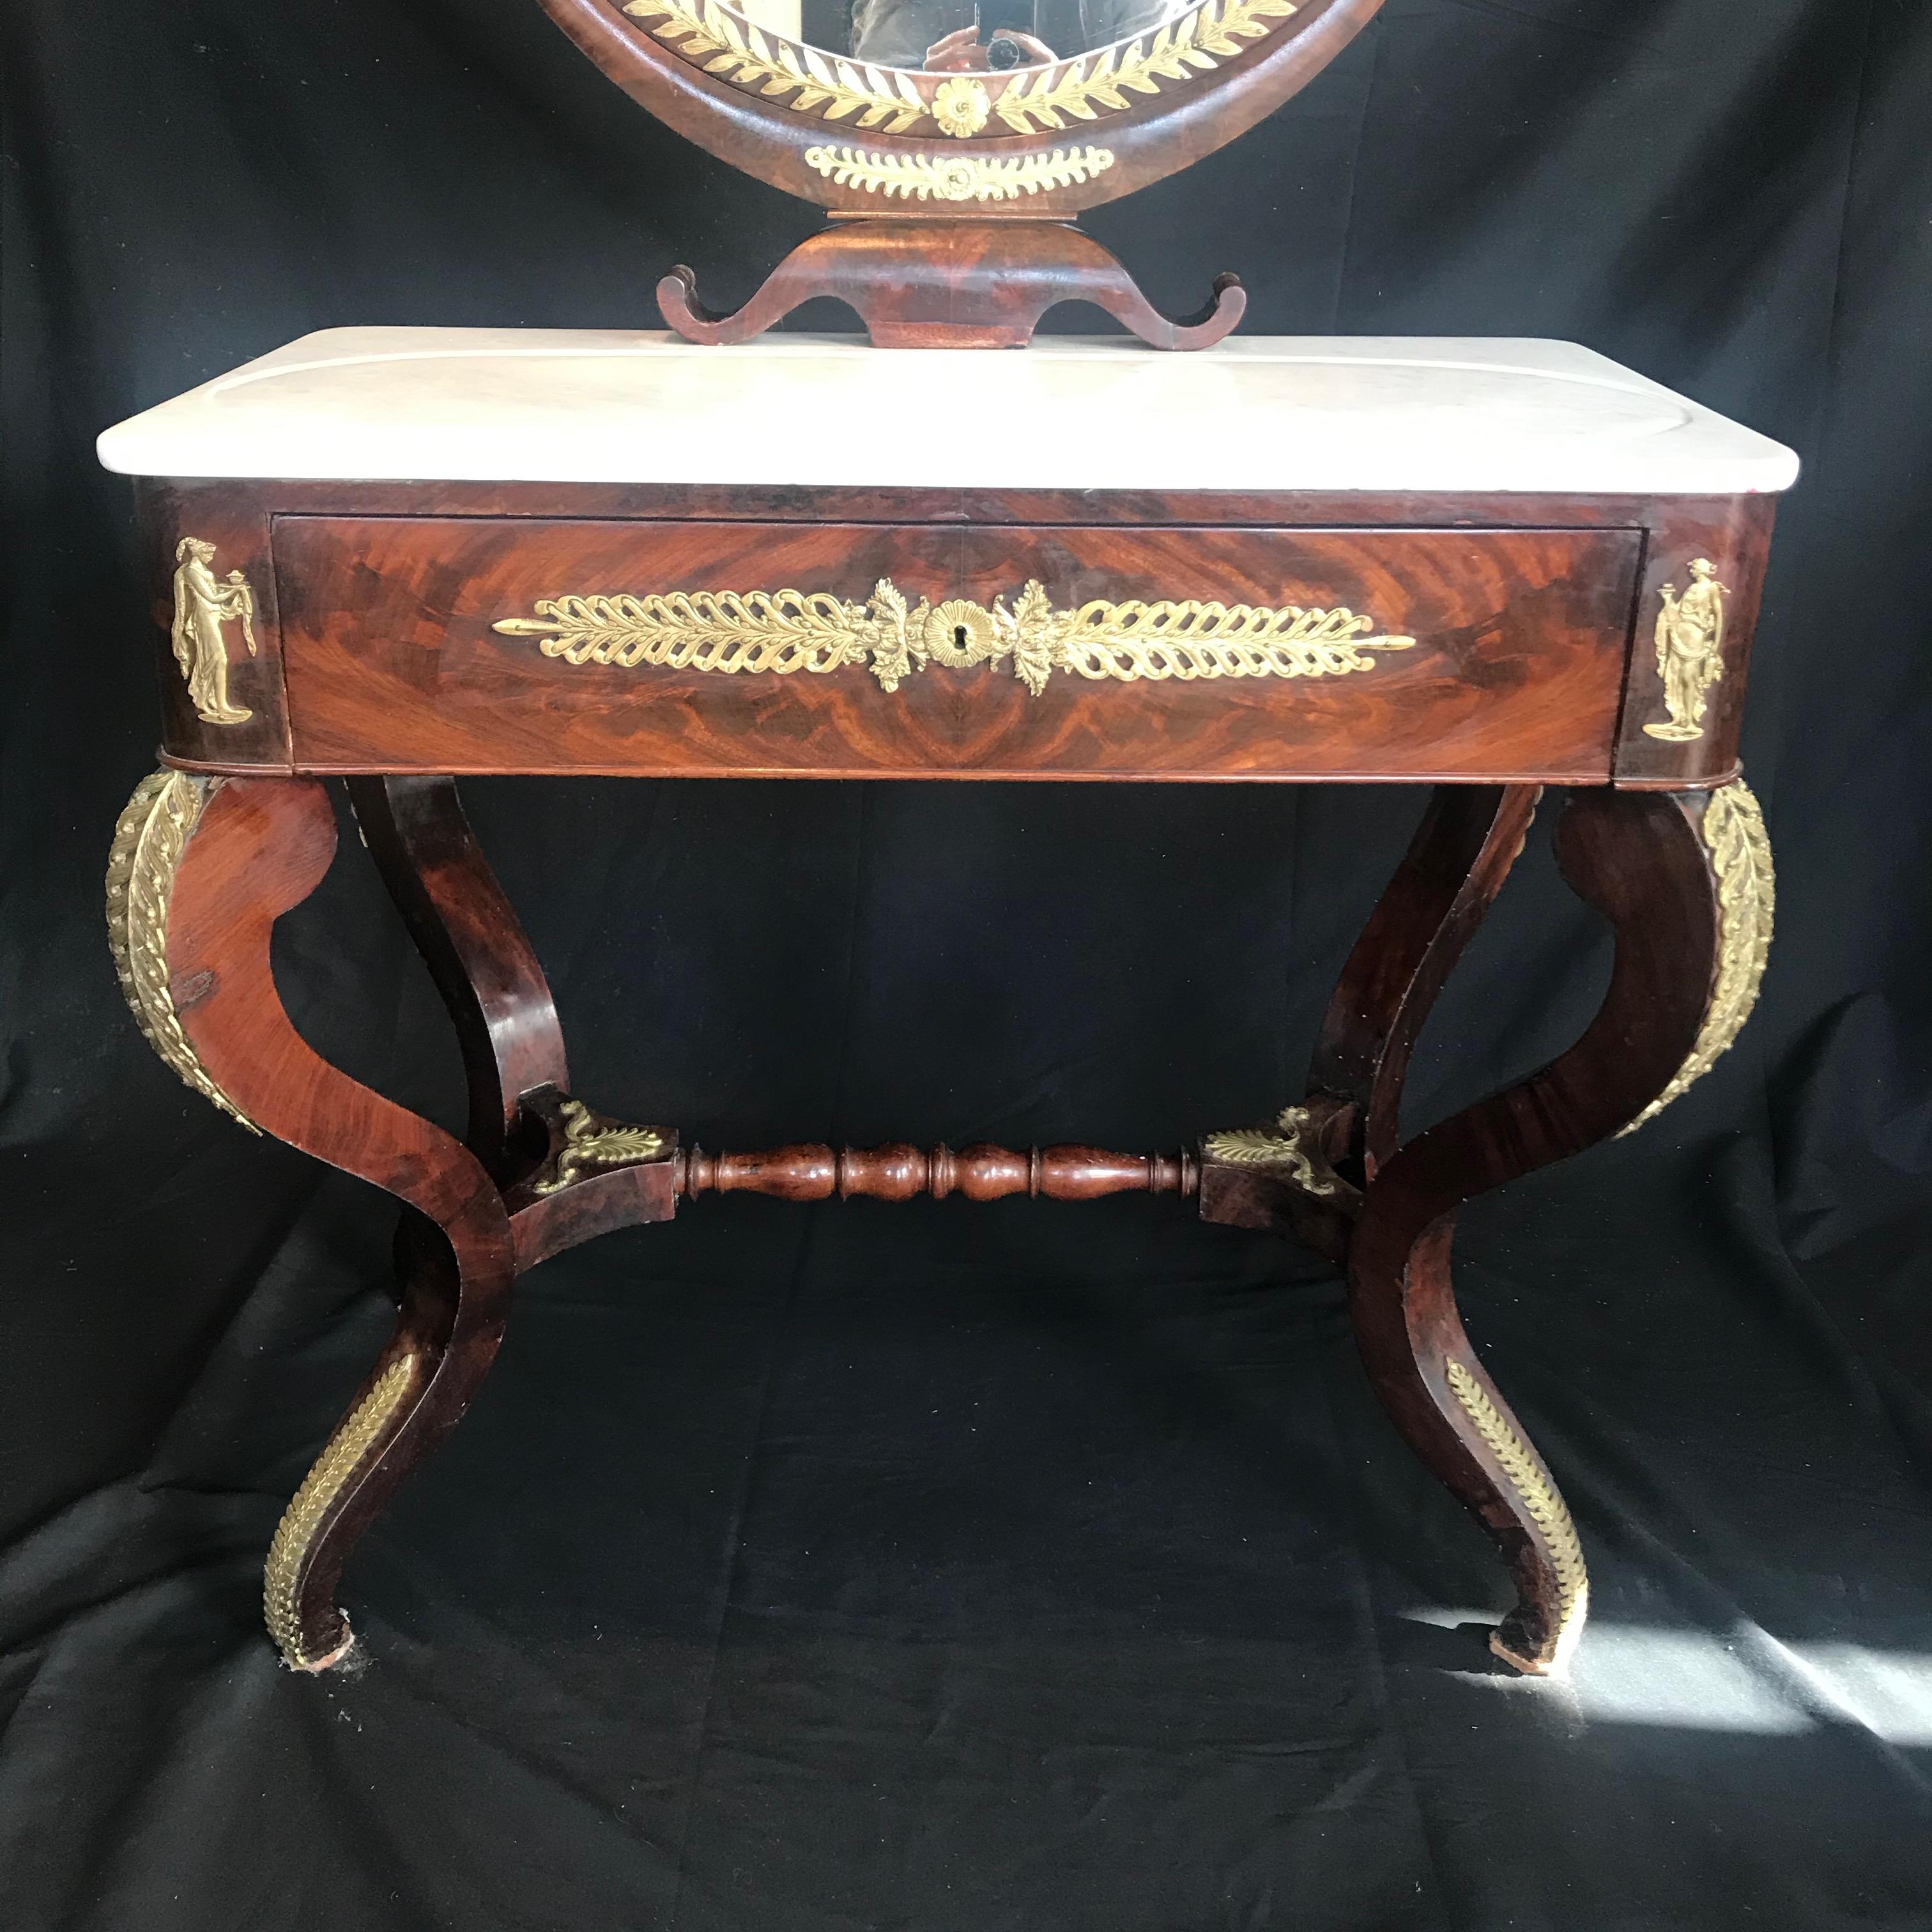 This exceptional French 19th century Empire mahogany dressing table is complete with its original mercury glass mirror and white Carrara marble top. The oval mirror is framed with beautiful brass trim and supported by mahogany carved arms in the